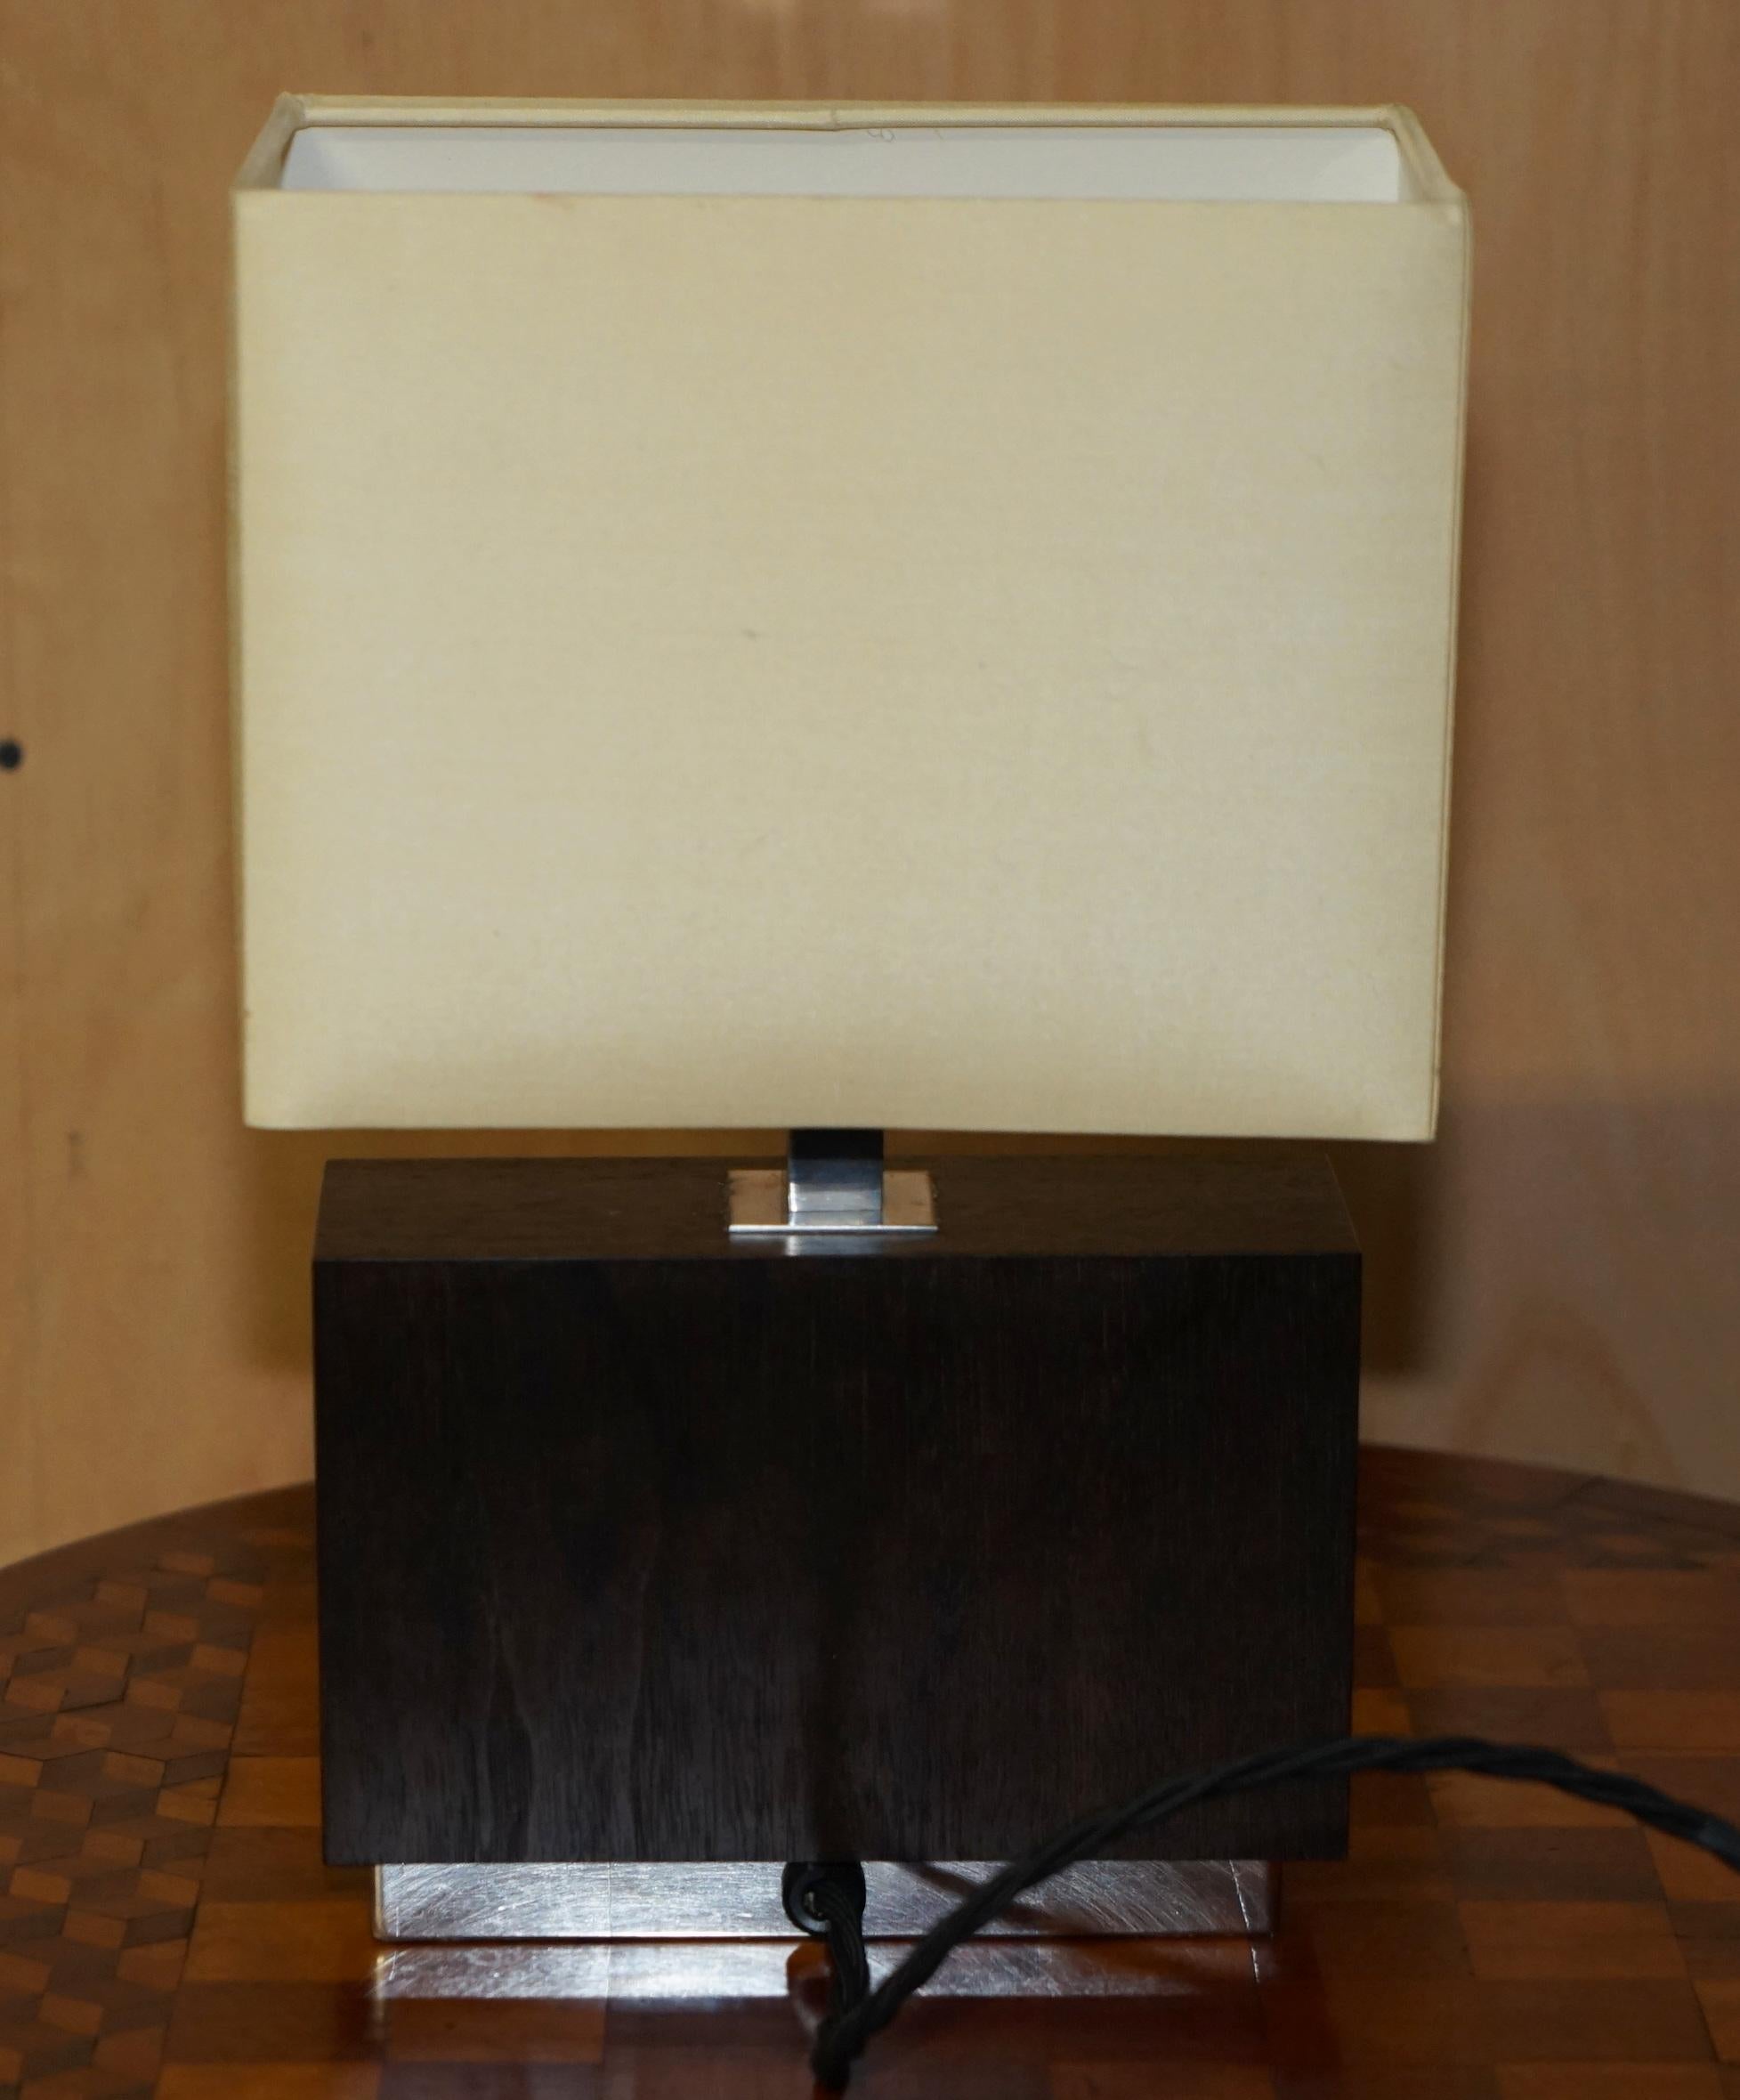 EXQUISITE PAIR OF DAVID LINLEY CHELSEA TABLE LAMPS WITH DIMMER SWITCHEs For Sale 4